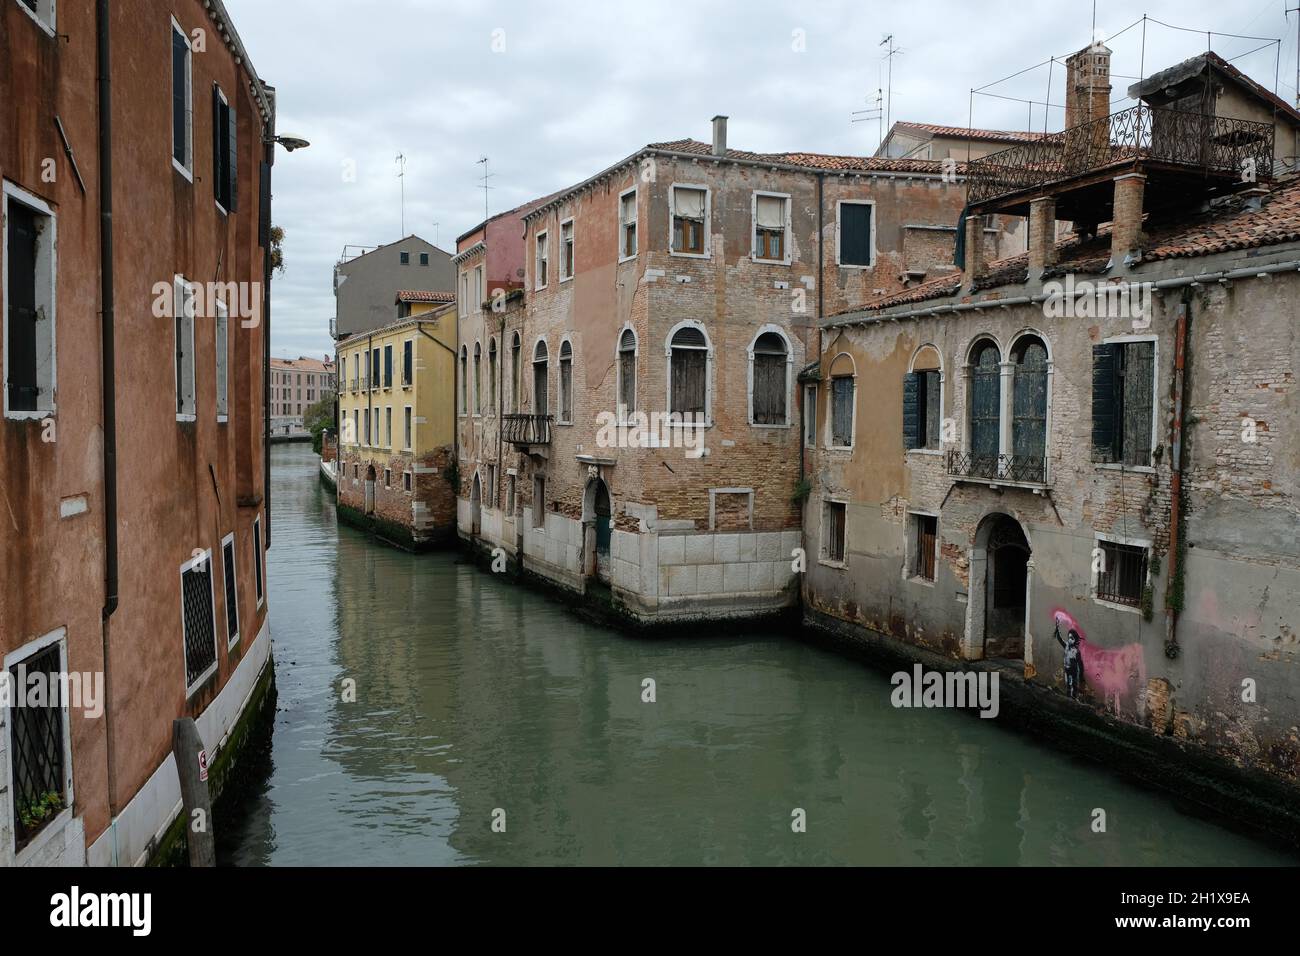 A new work of British street artist Banksy has been sighted in Venice on a building along the Rio de Ca Foscari canal in Venice, Italy May 15, 2019. Stock Photo